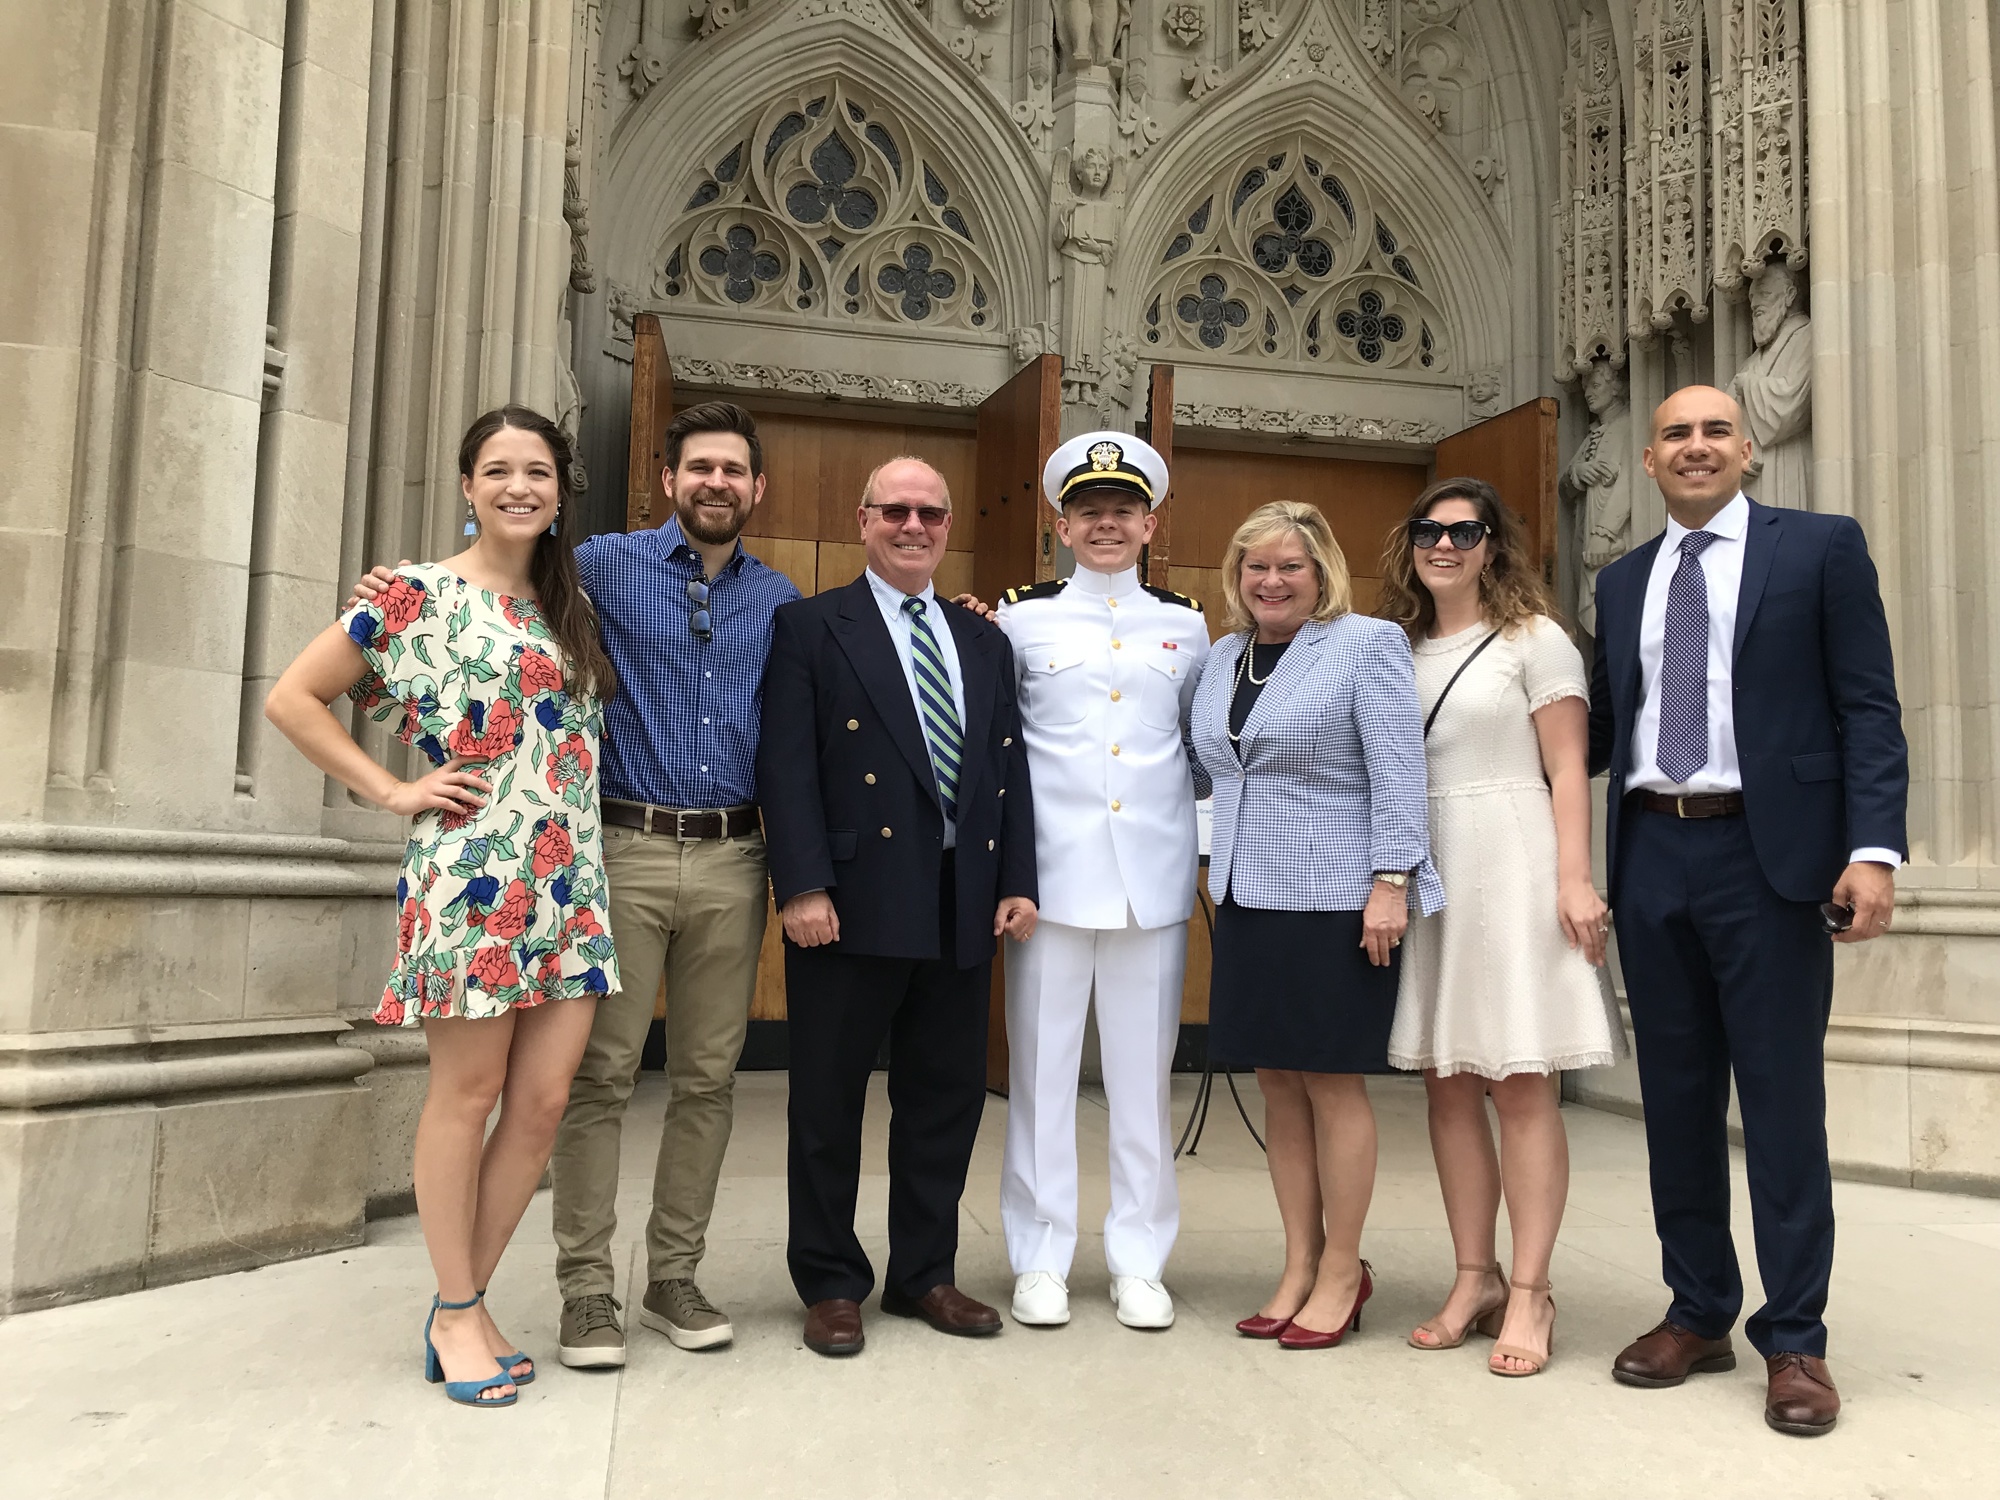 Barret Manfre, a 2015 Flagler Palm Coast High School graduate and son of Cornelia and former sheriff Jim Manfre, was commissioned as an ensign in the U.S. Navy on May 10 at the Duke Chapel in Durham North Carolina. Courtesy photo